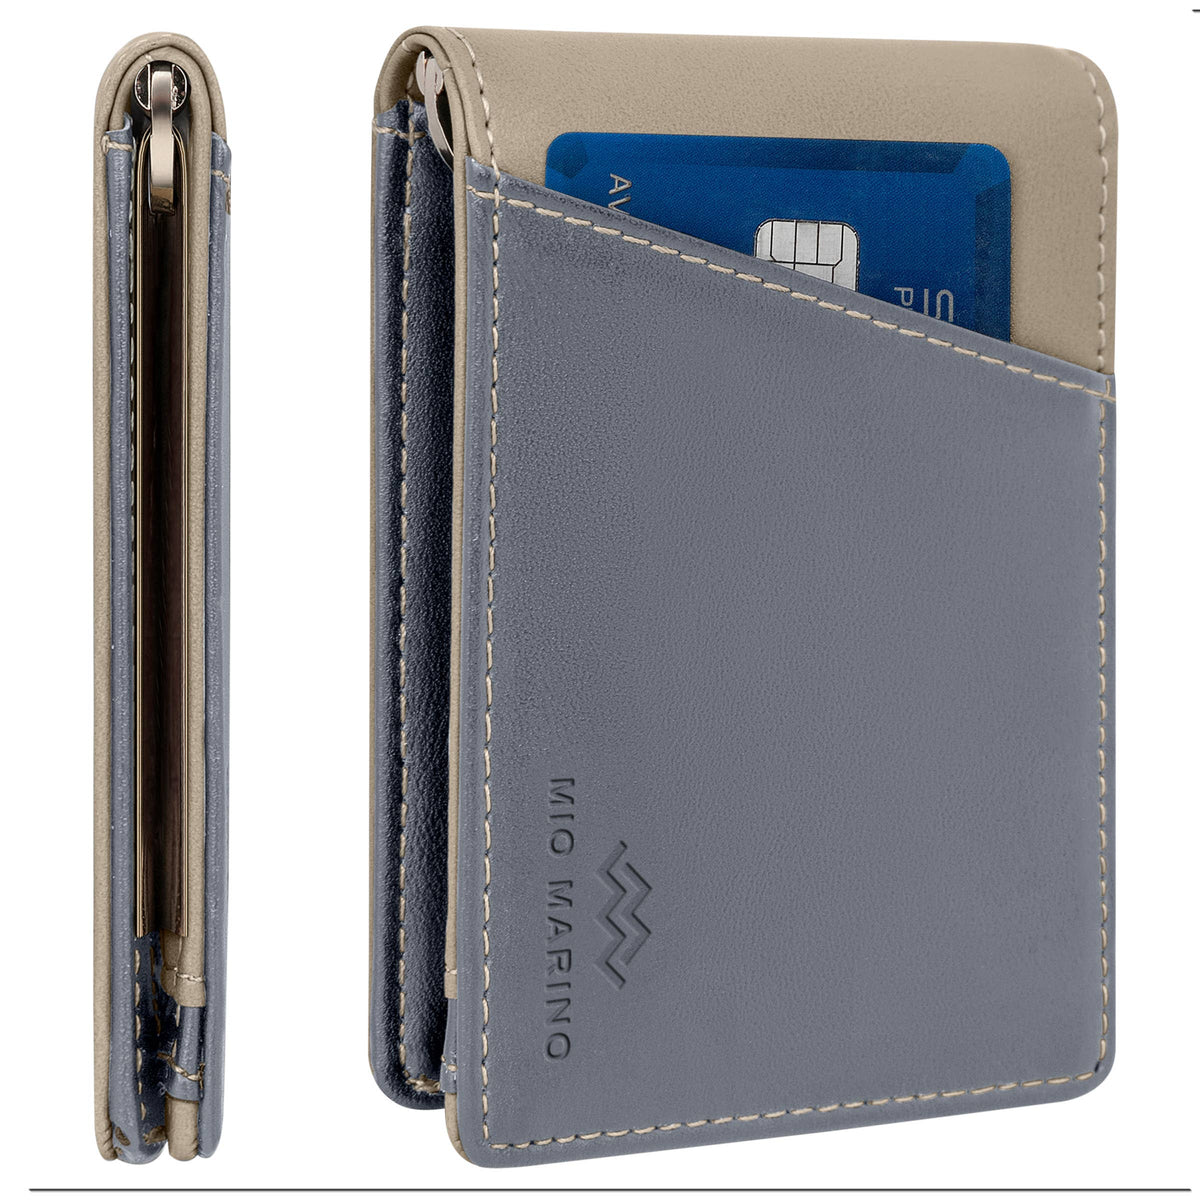 Mio Marino - Men's Slim Bifold Wallet with Quick Access Pull Tab: Carbon Black/Brown - WALLET - Synik Clothing - synikclothing.com